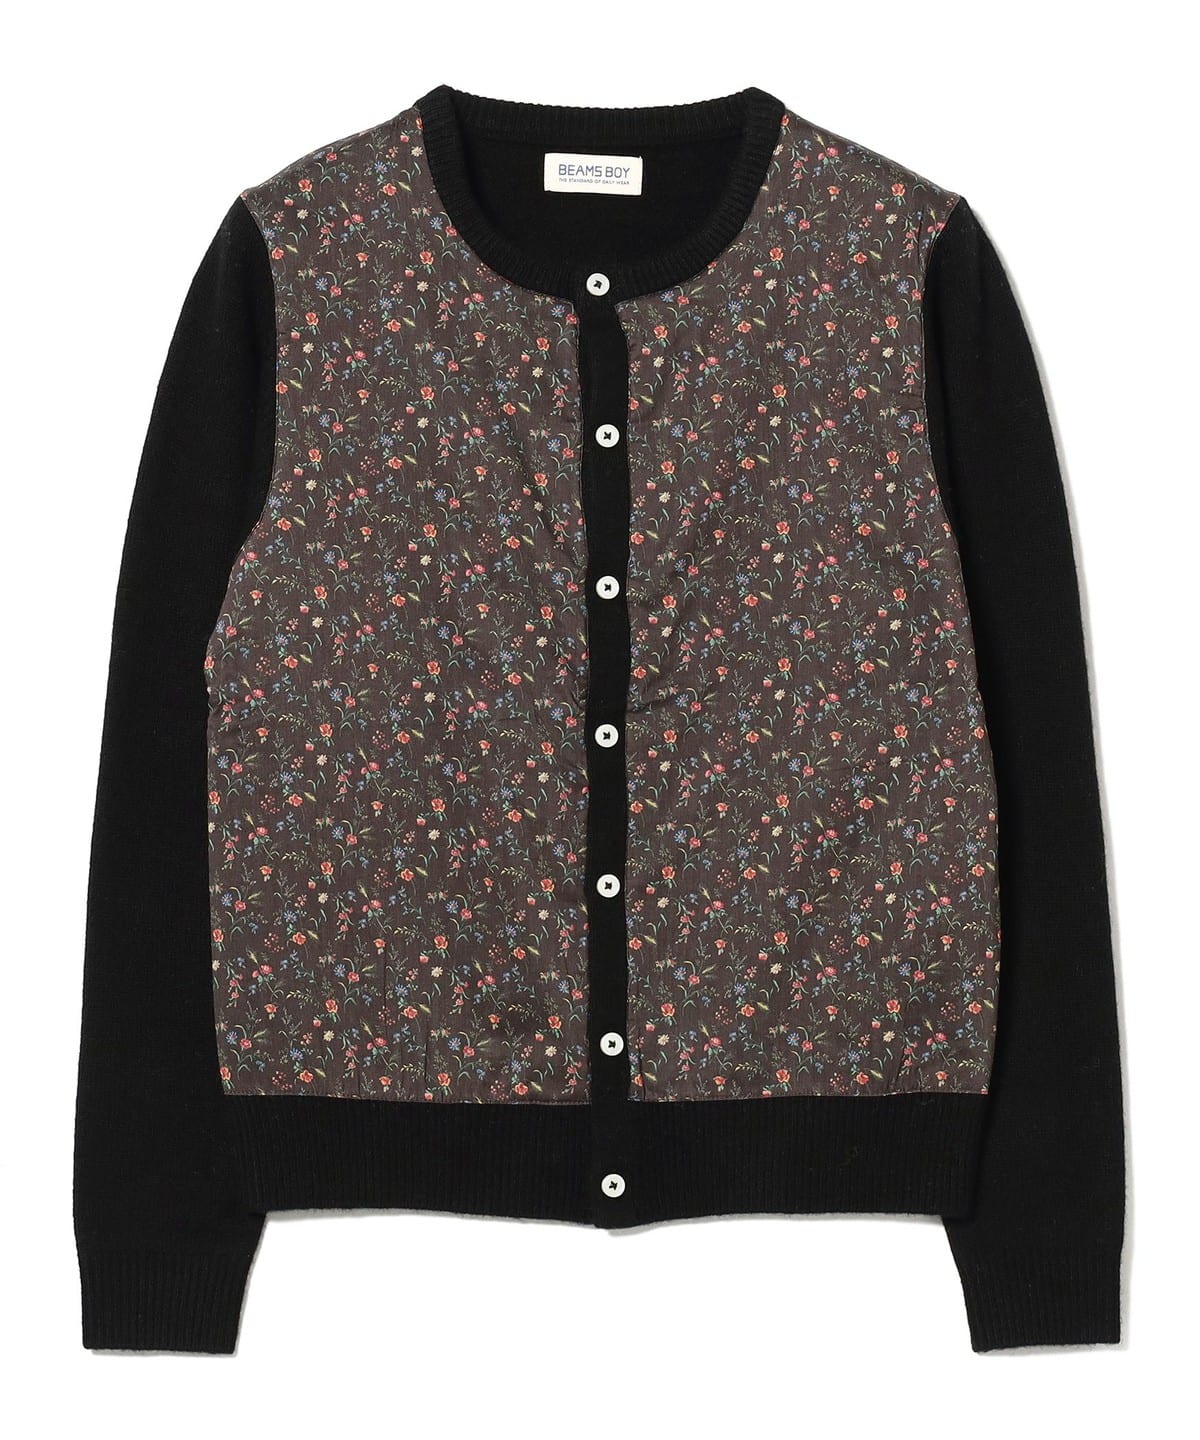 [Outlet] BEAMS BOY / Liberty Patch Cardigan